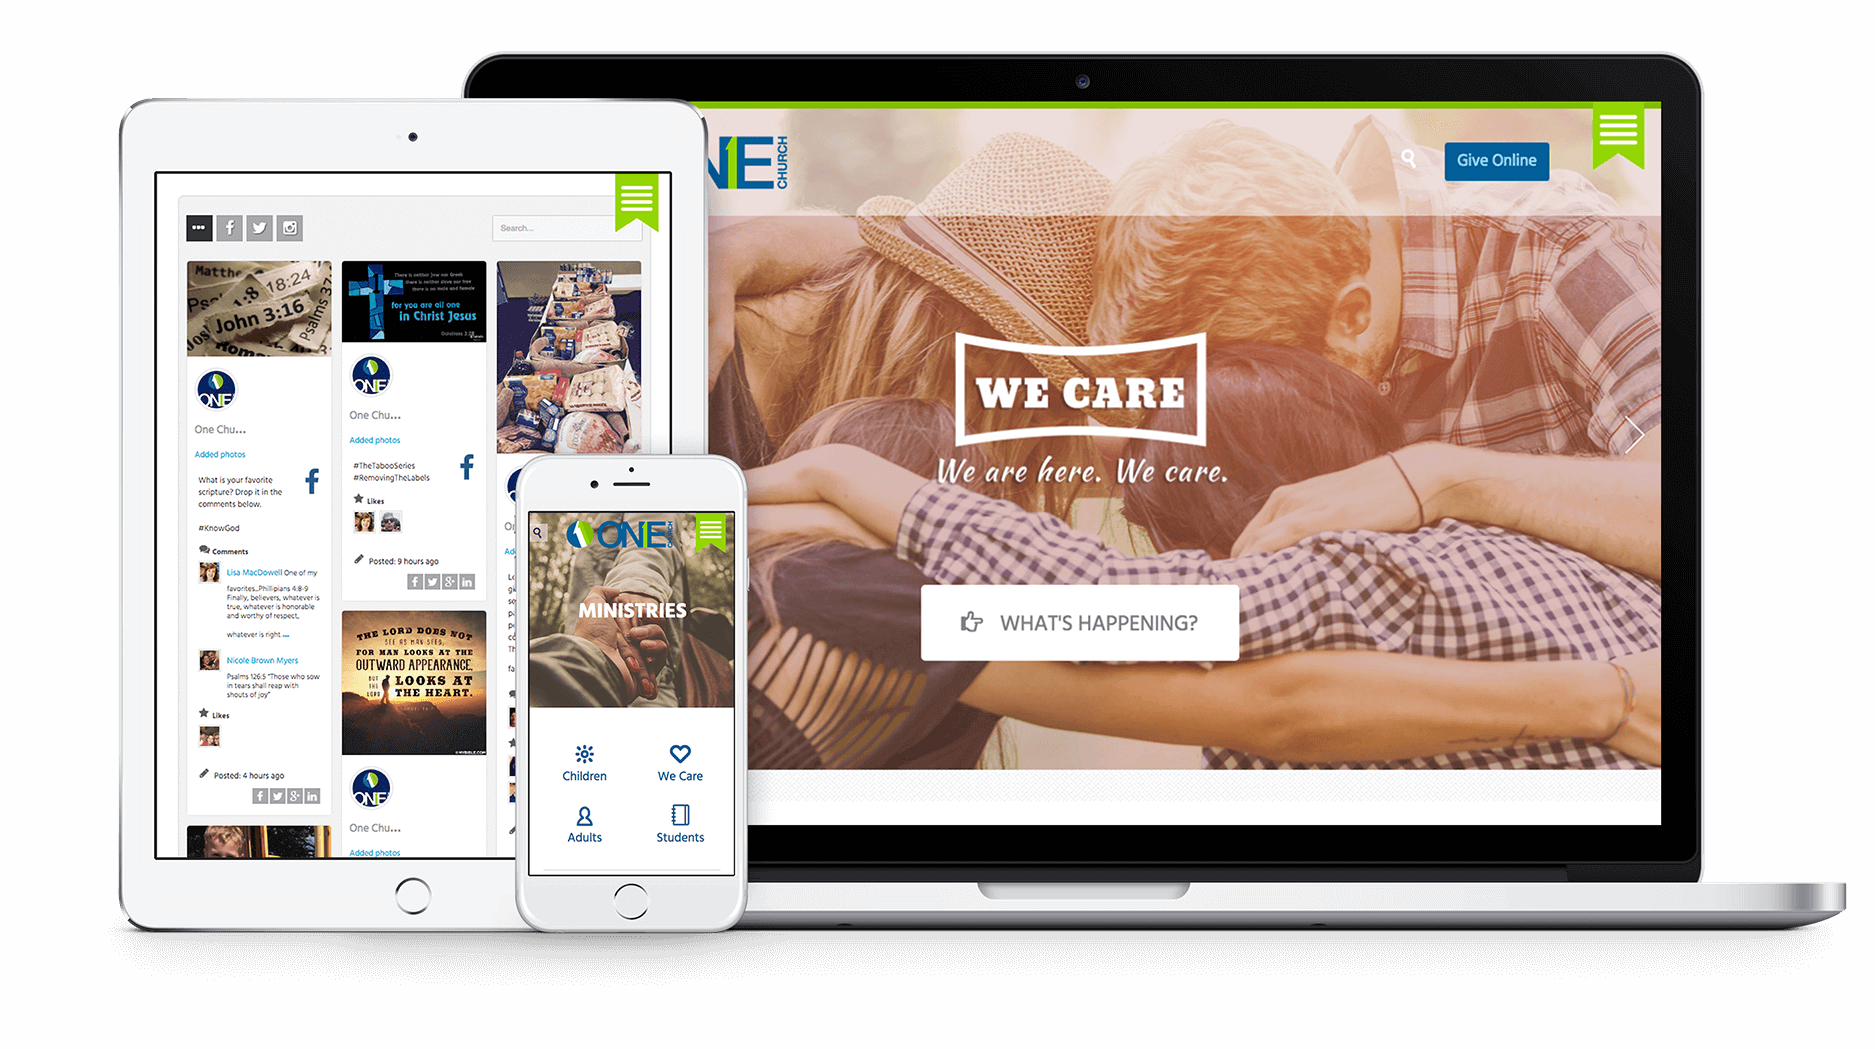 Responsive Website Design Services for One Church mockup